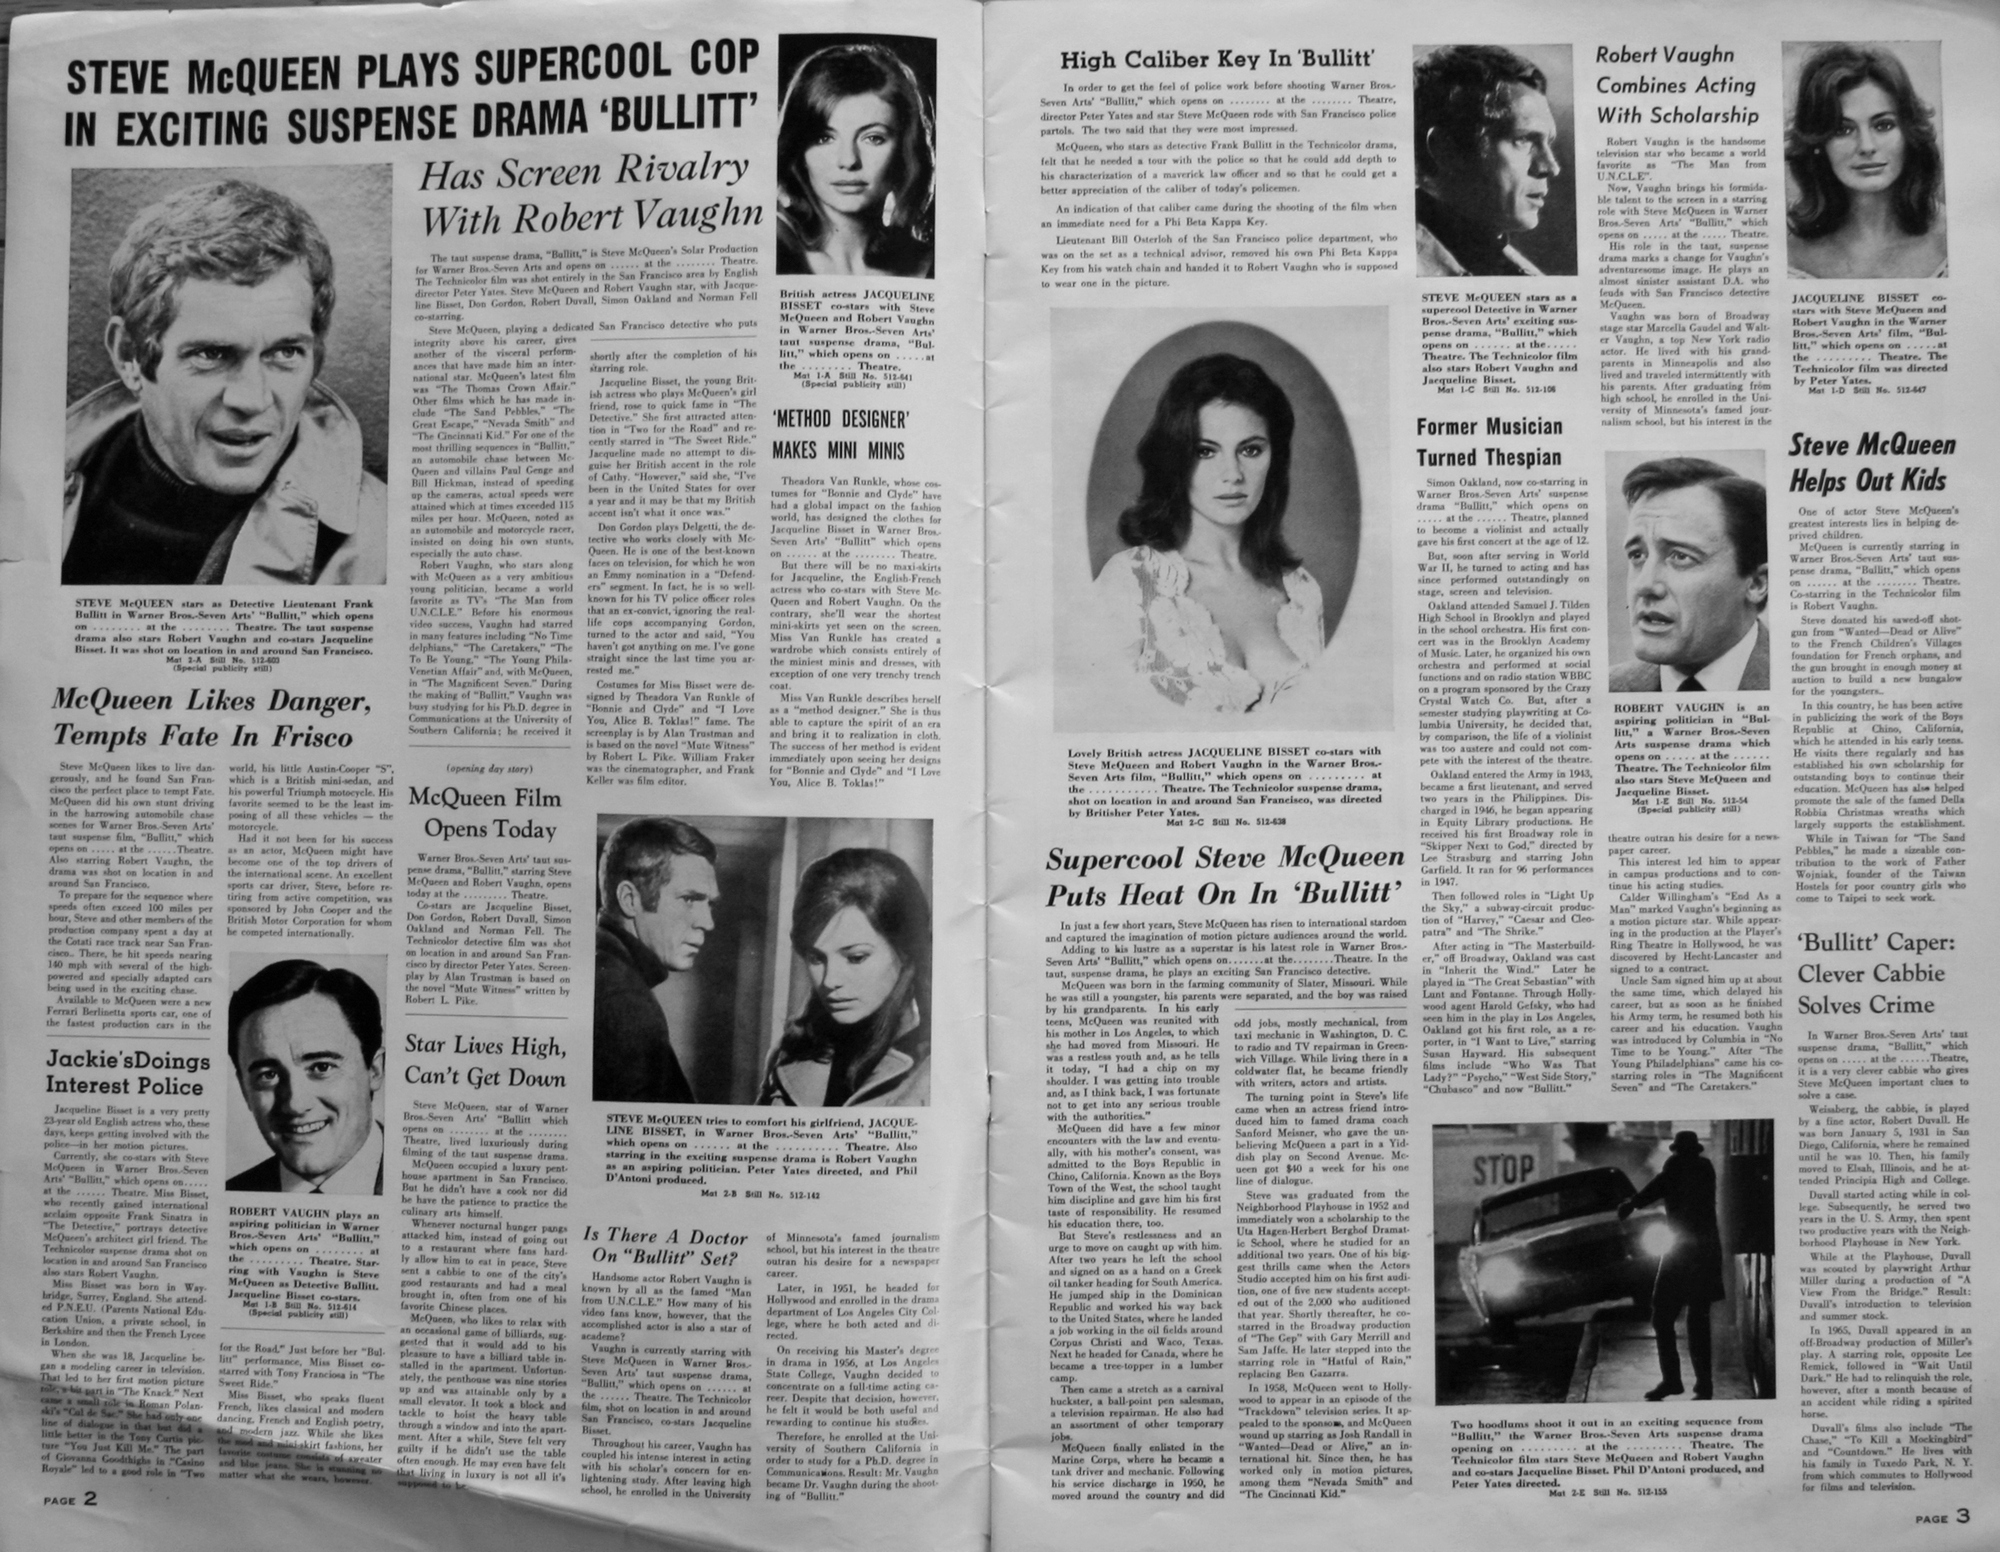  These pages are from the  Warner Bros. Seven Arts Pressbook  .&nbsp;The book went to theaters so they could have material to promote  Bullitt .&nbsp; Property Frank Marranca  